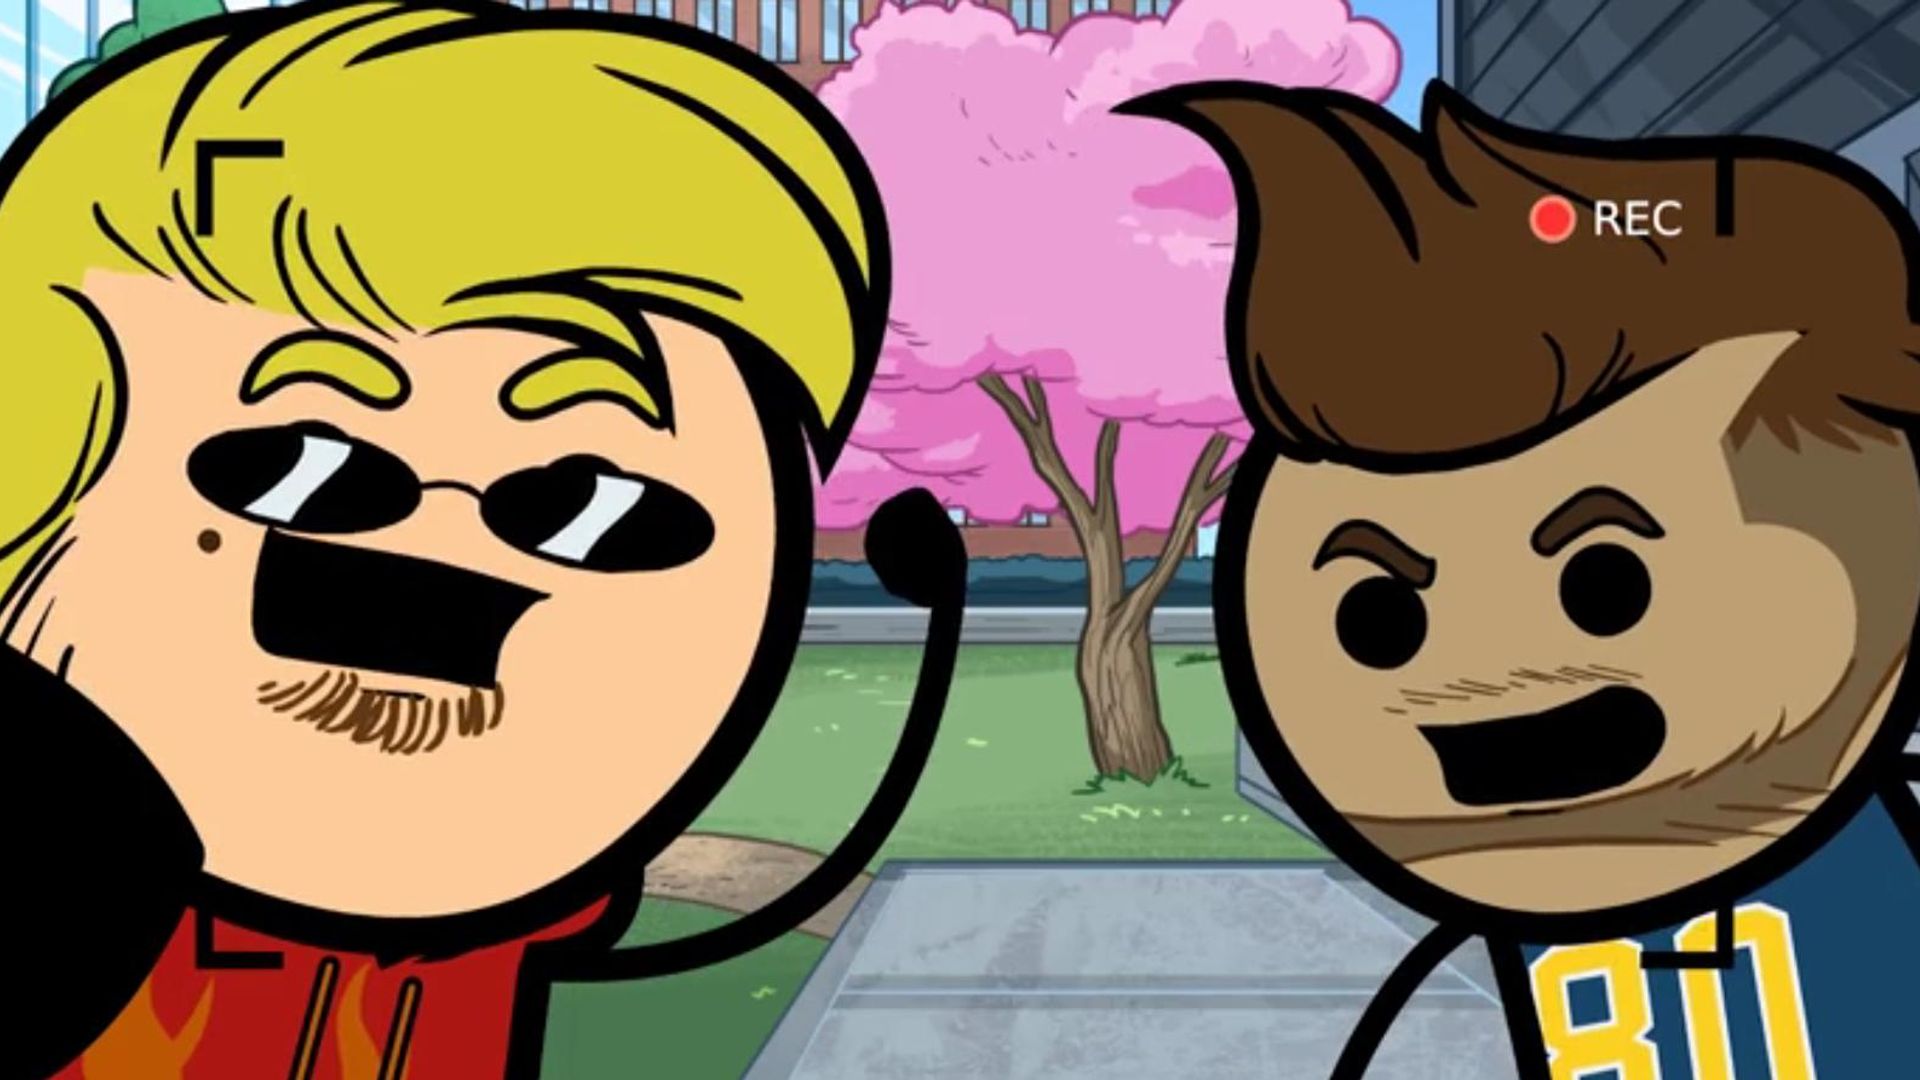 The Cyanide & Happiness Show background